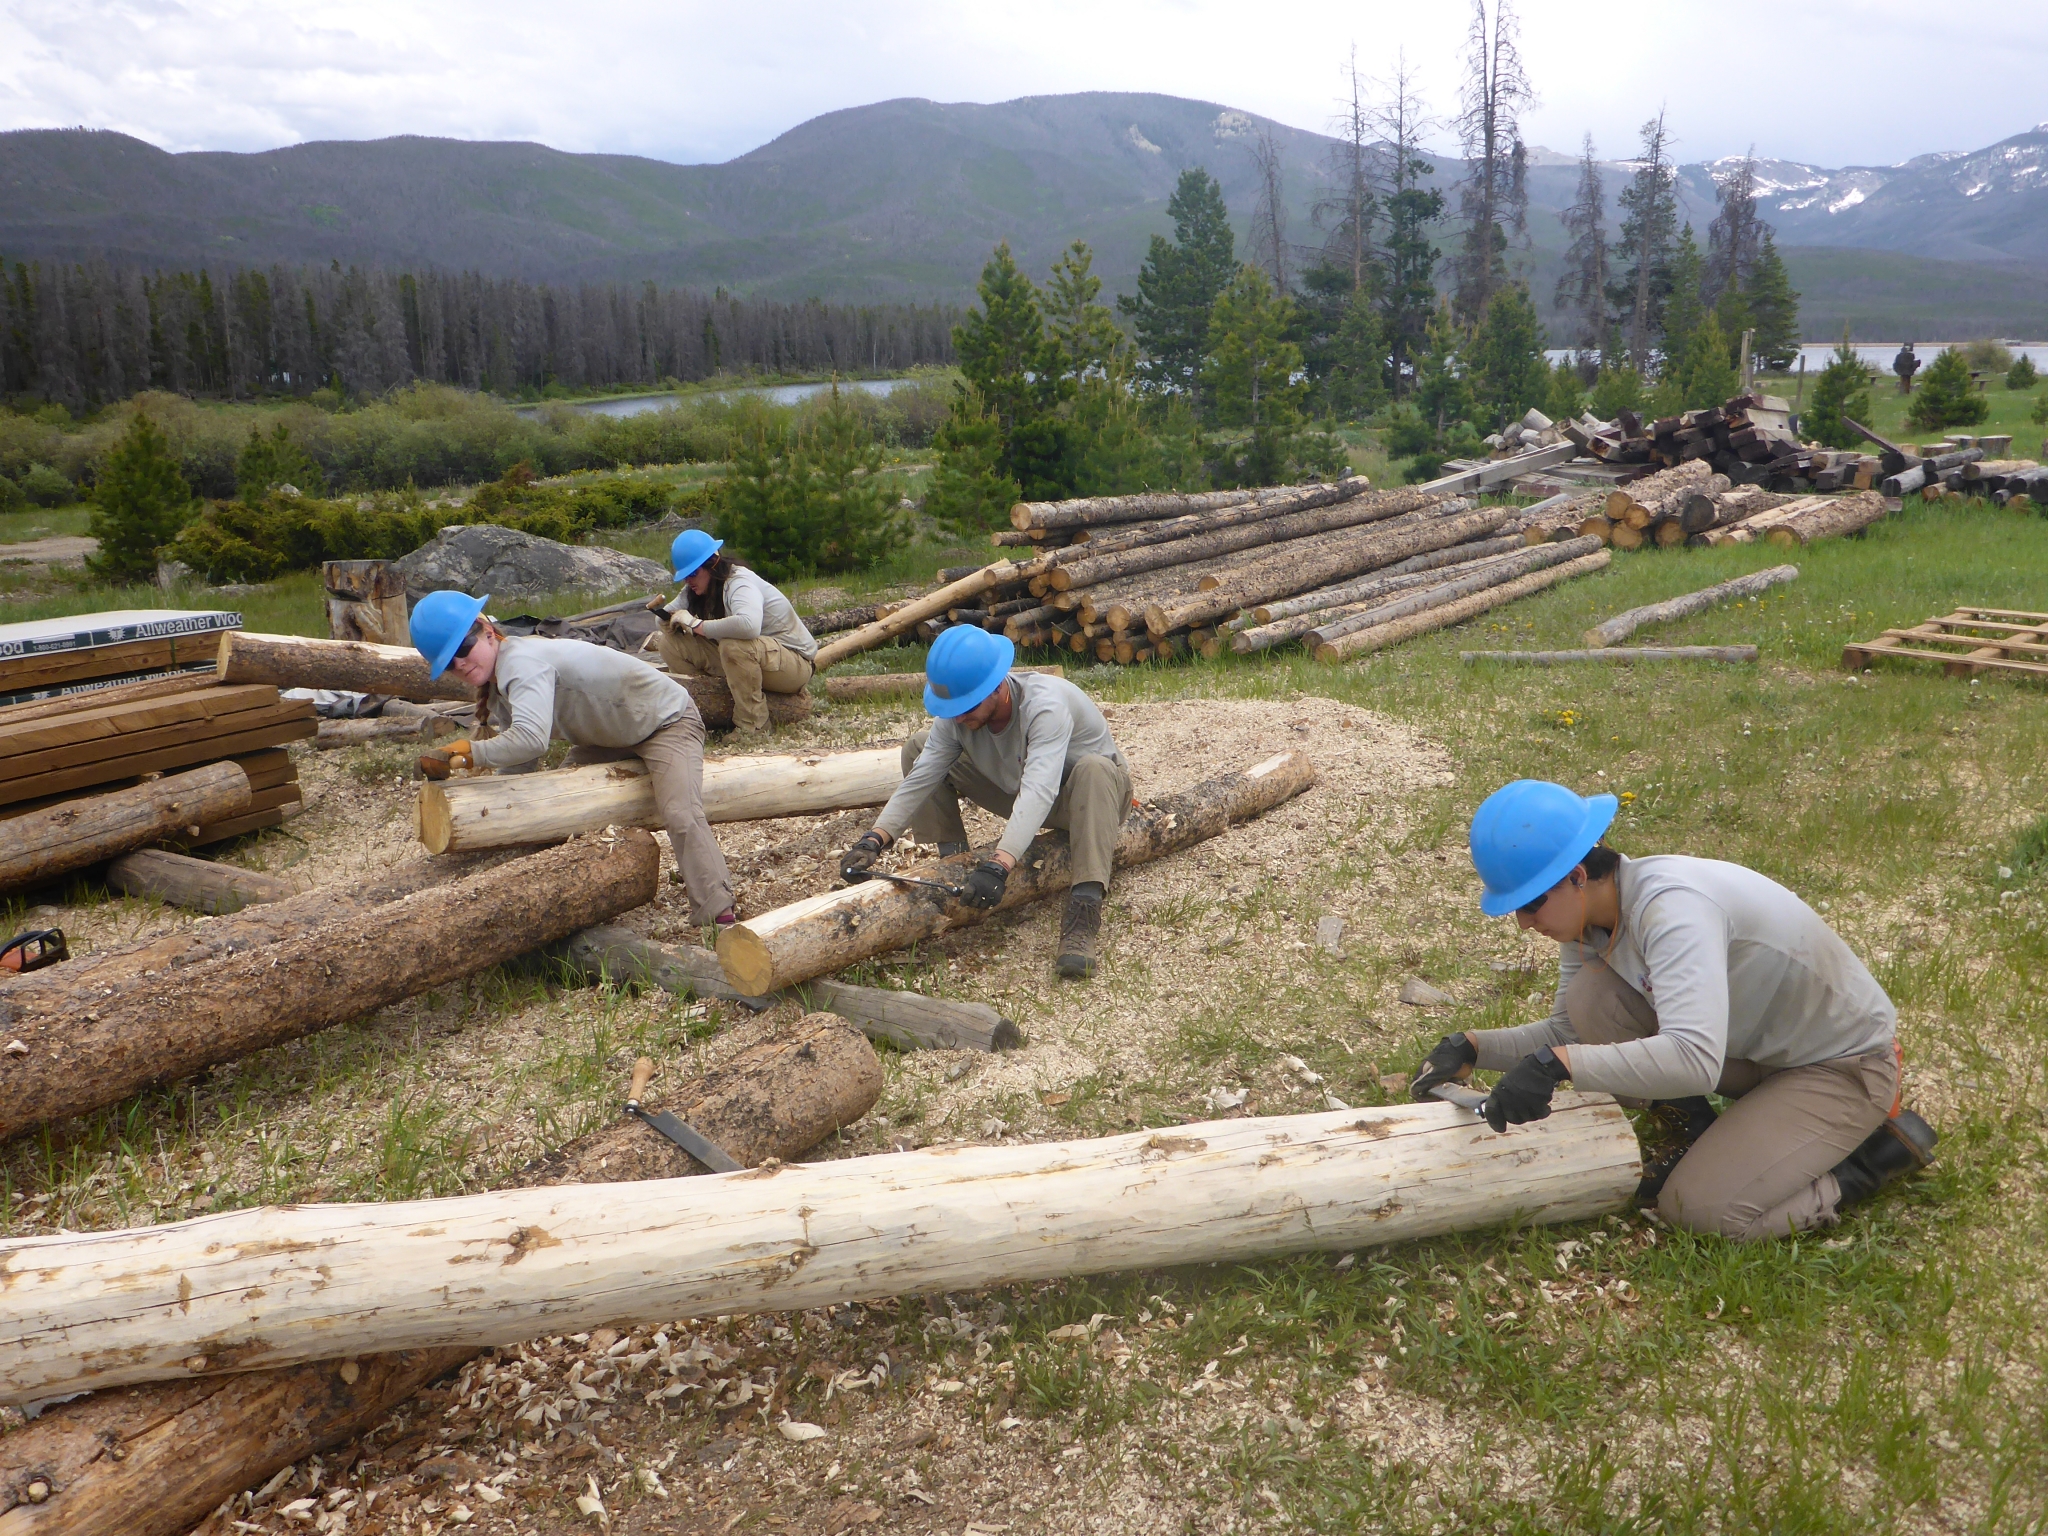 Skinning logs to be used for trail kiosks.